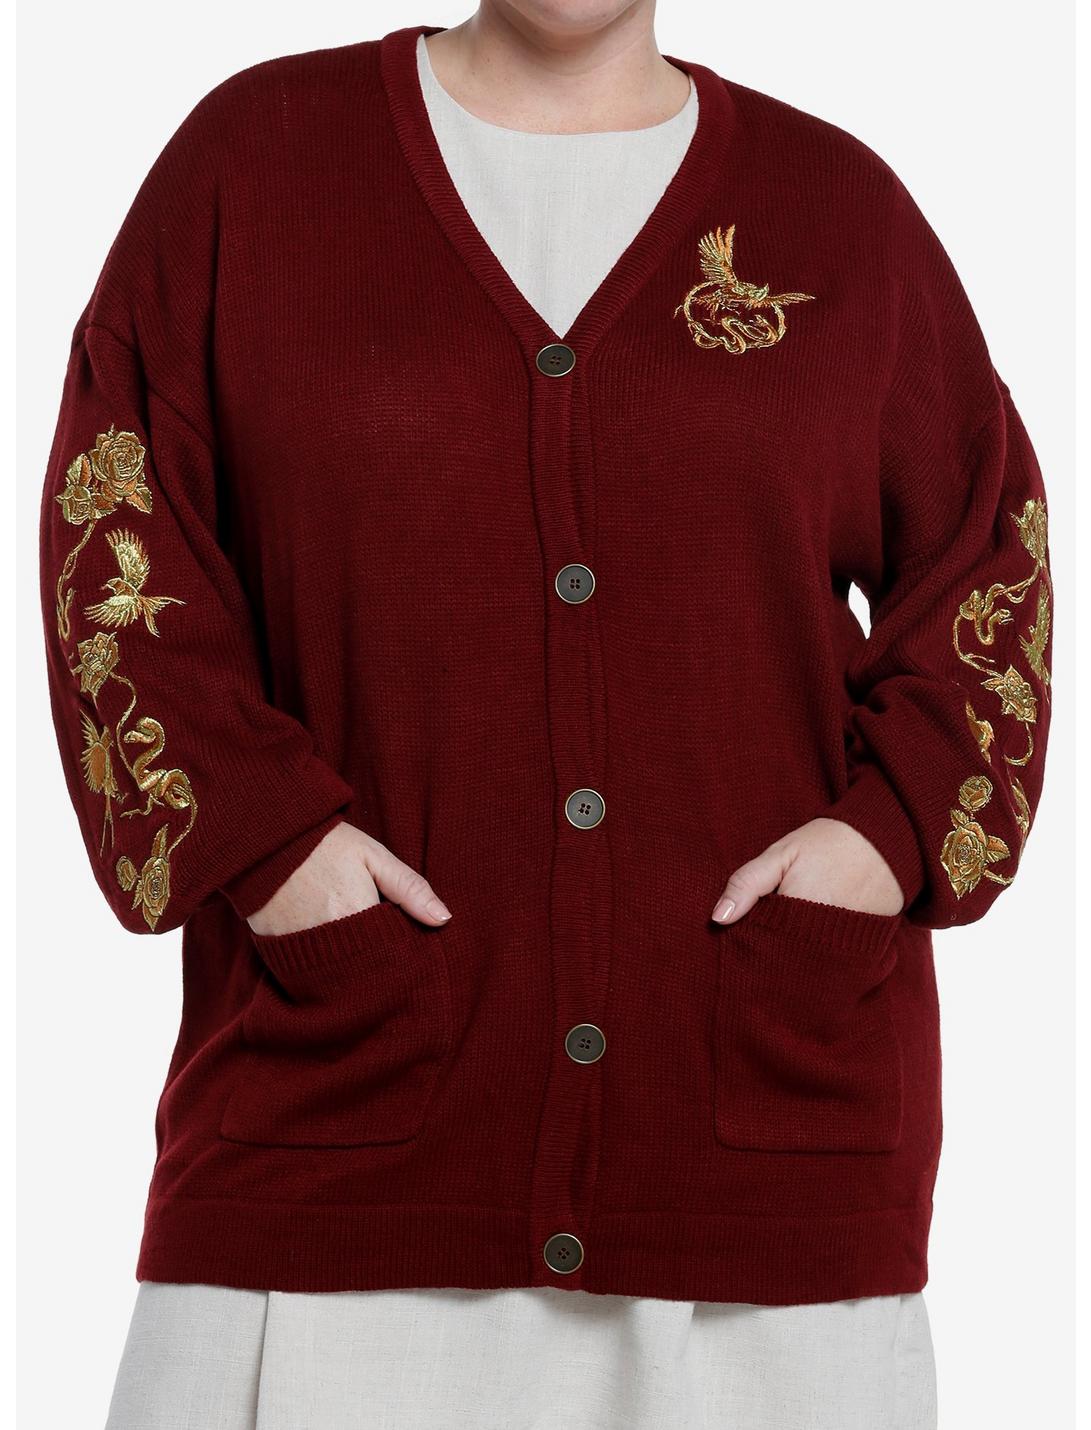 The Hunger Games: The Ballad Of Songbirds & Snakes Girls Embroidered Cardigan Plus Size, GOLD, hi-res